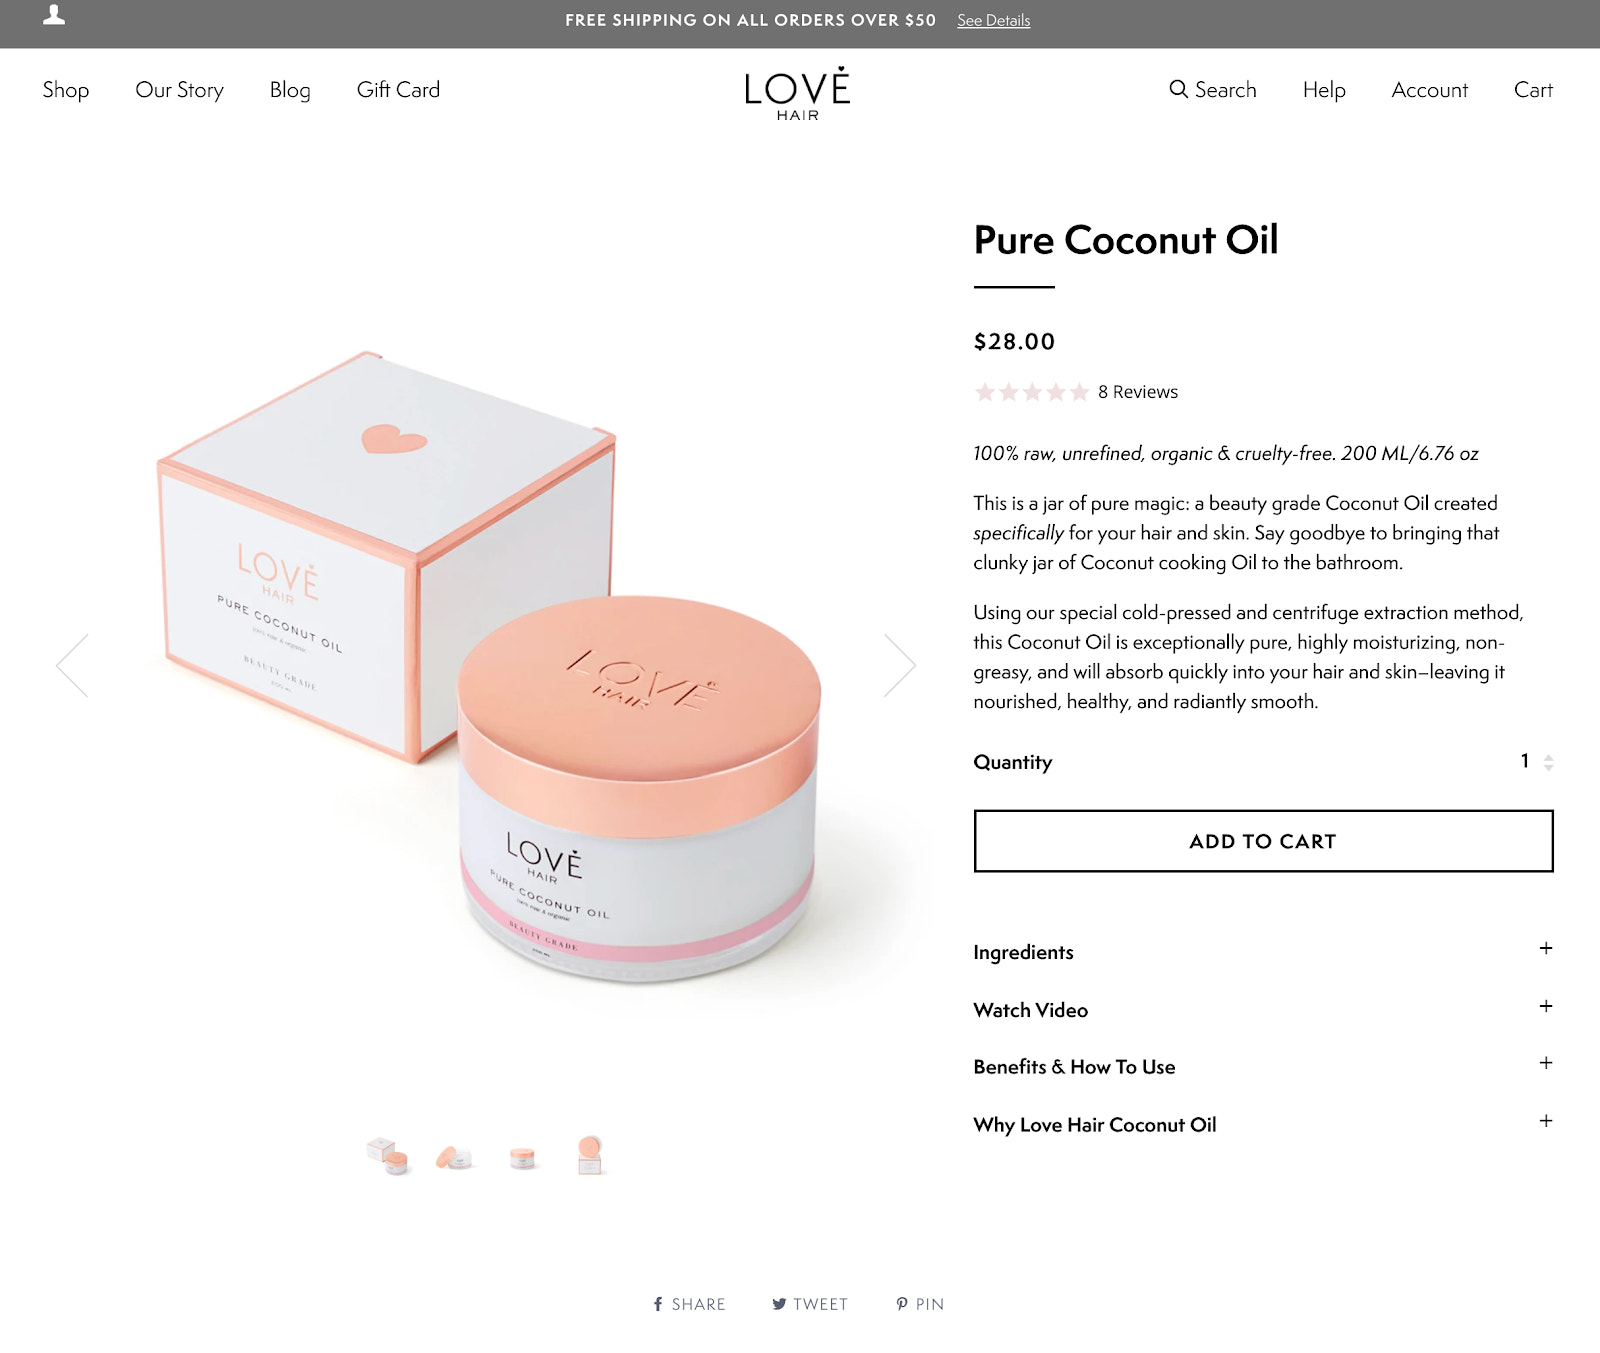 Product Pages: 16 Beautiful Product Landing Page Examples (2021)